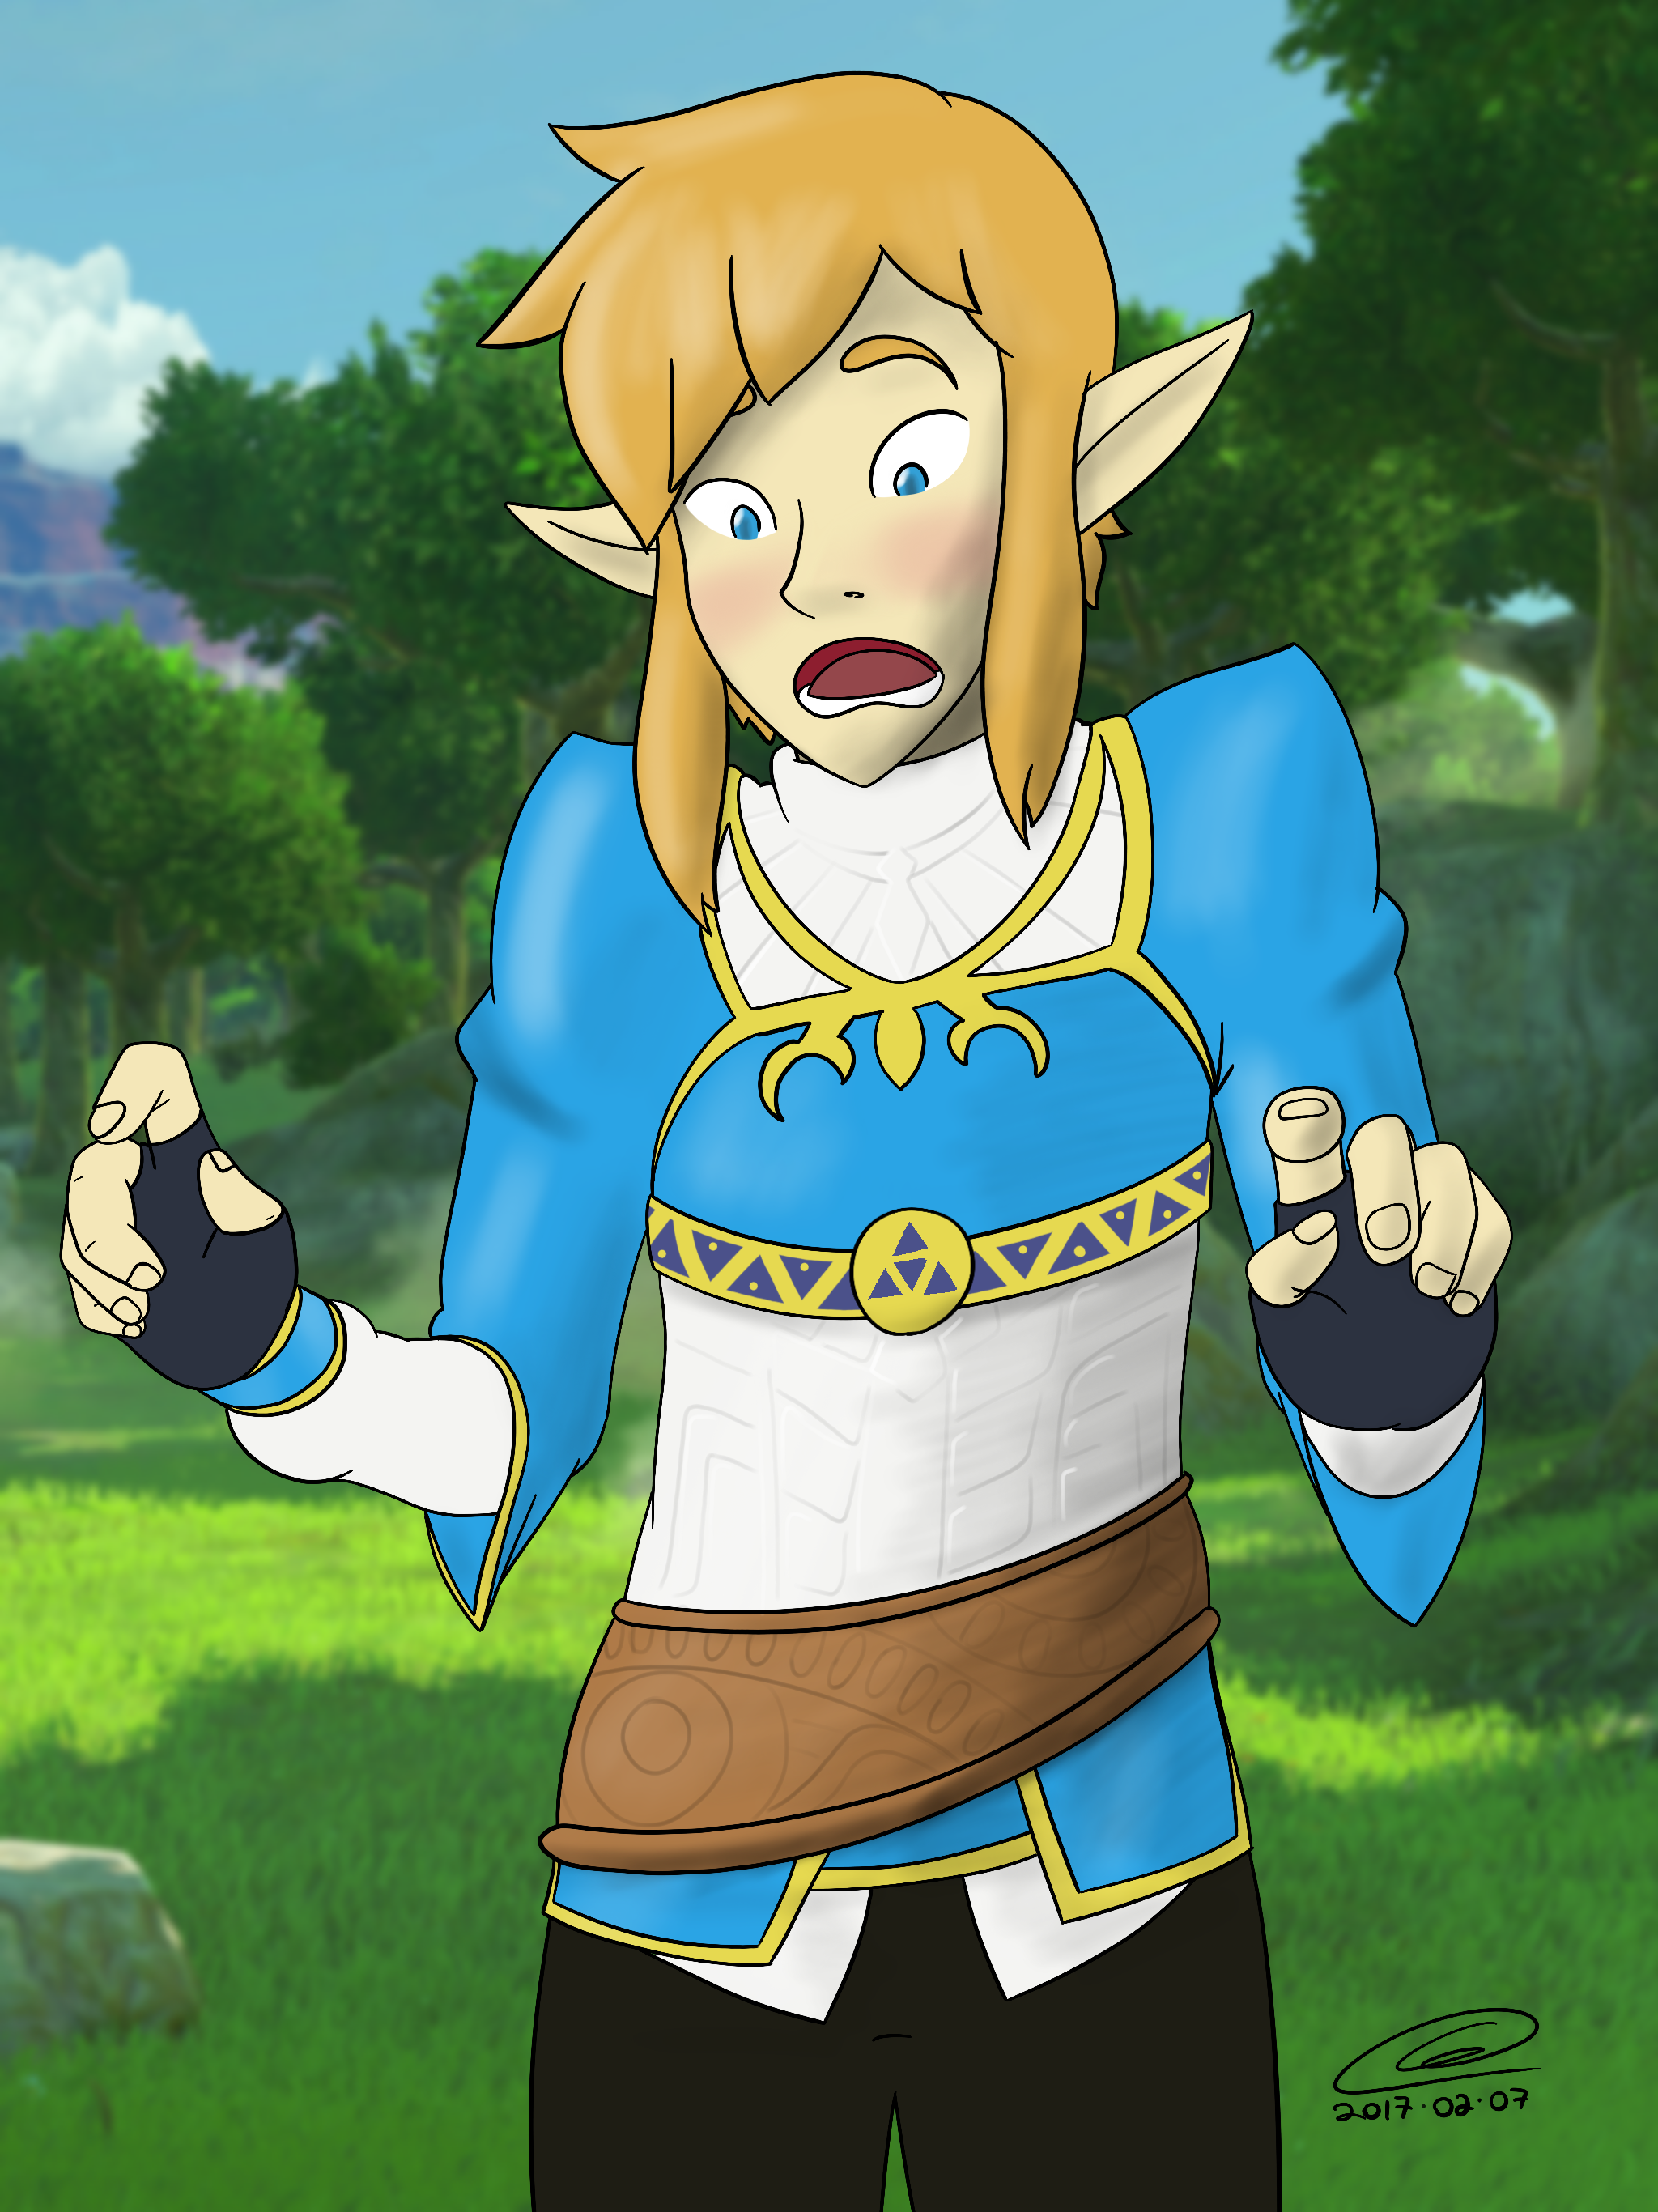 Link in Zelda's Outfit (Breath of the Wild) by CalliEcho on DeviantArt...